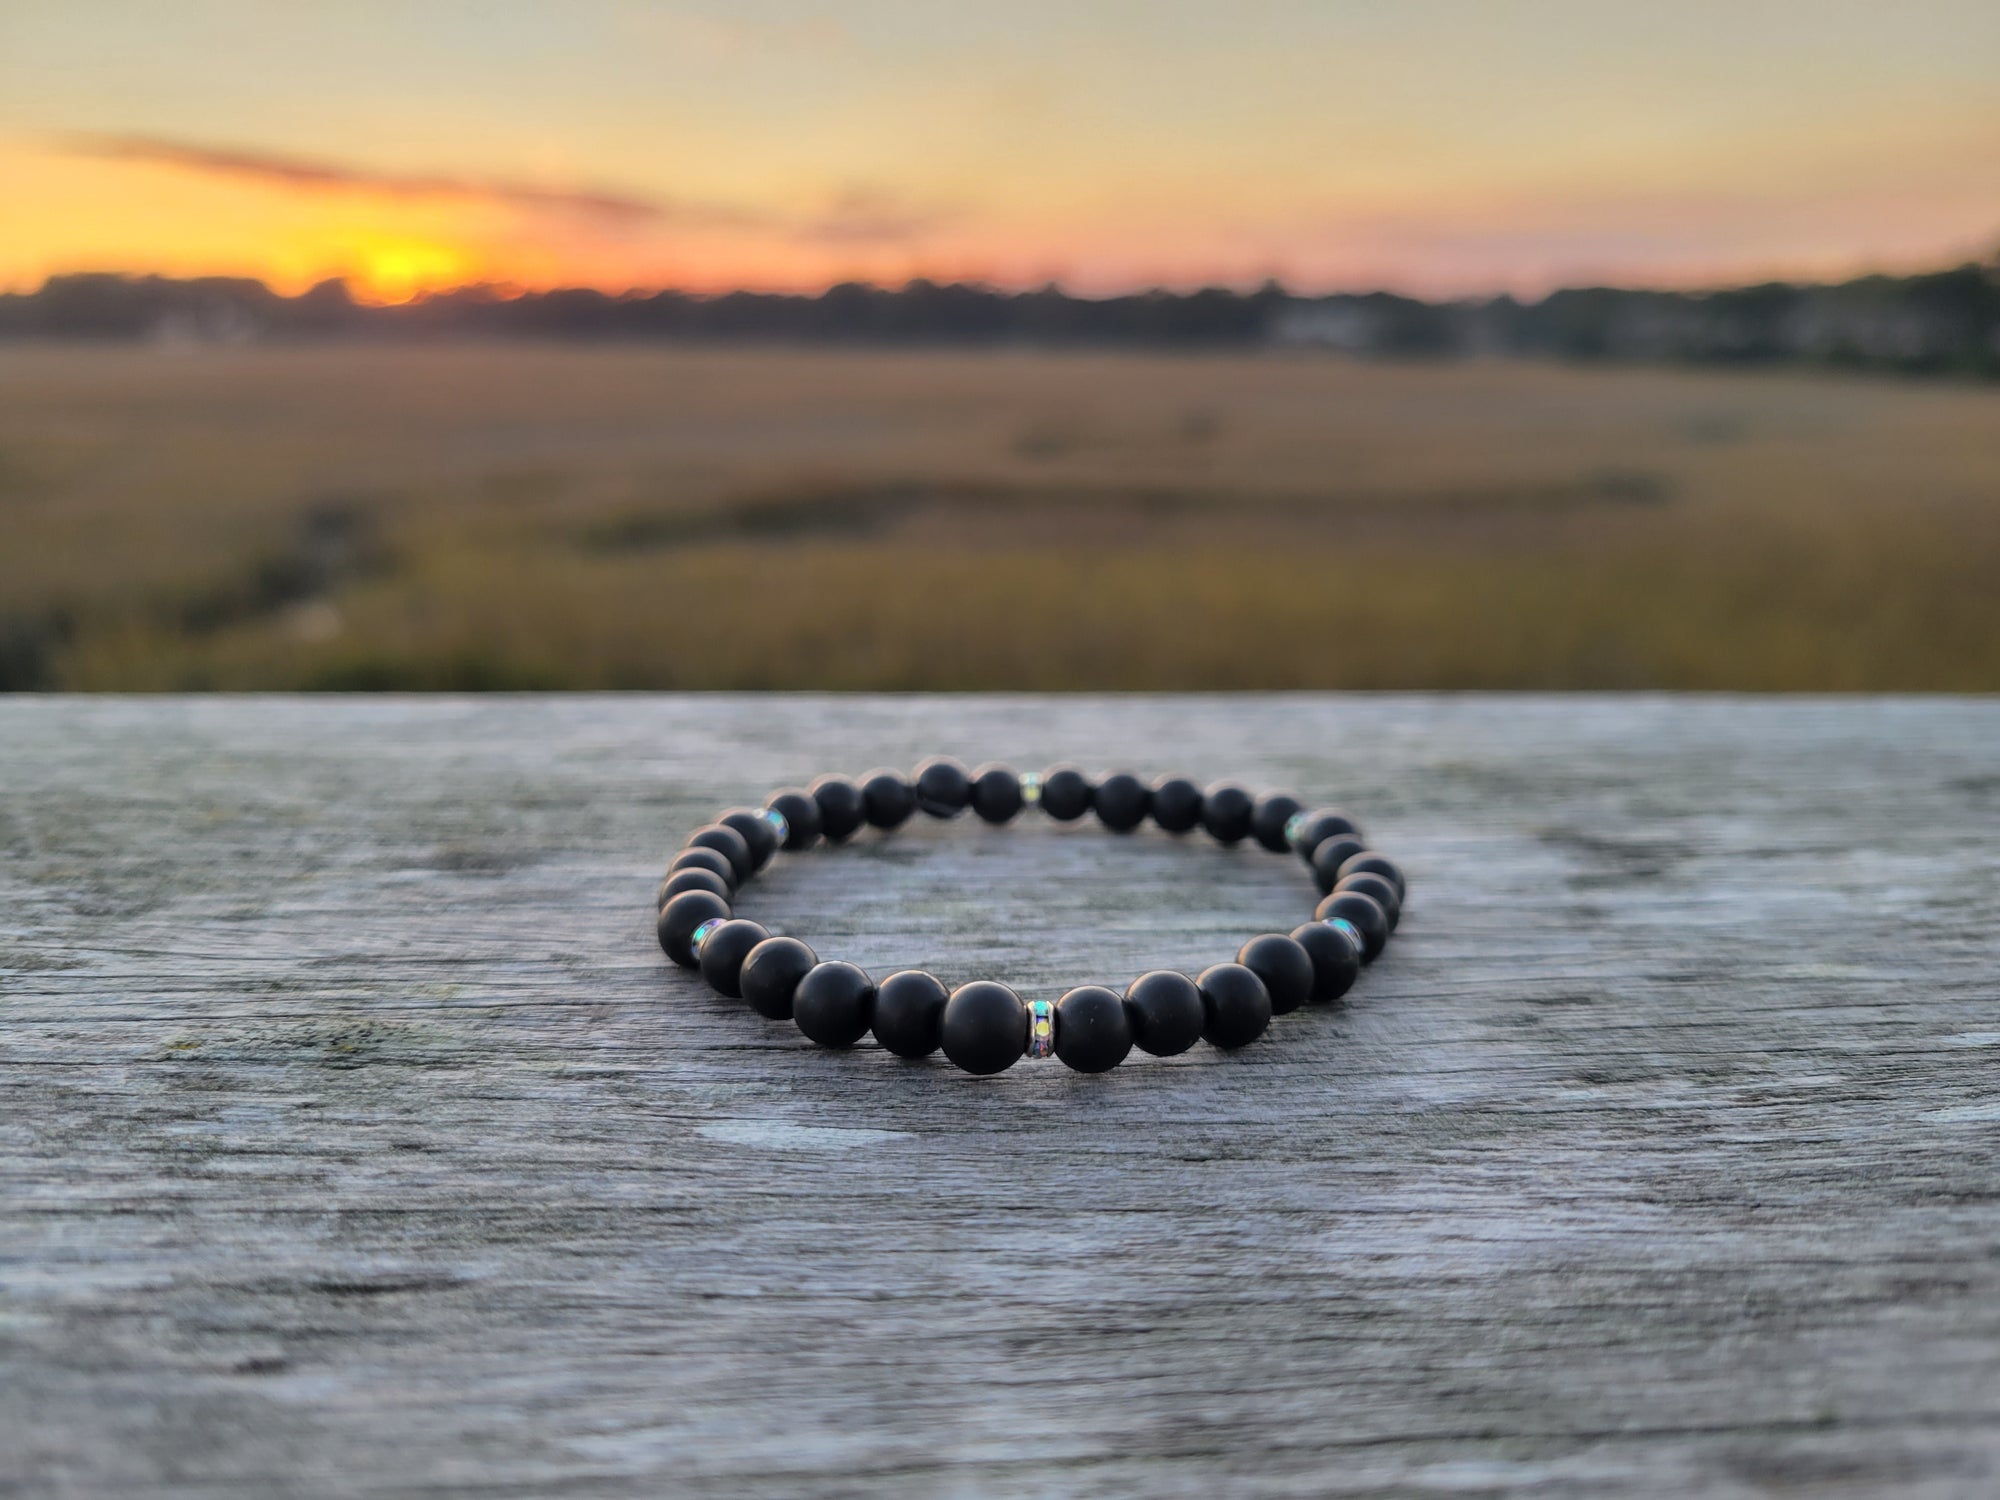 6mm Shungite and Austrian Crystal Protection Bracelet